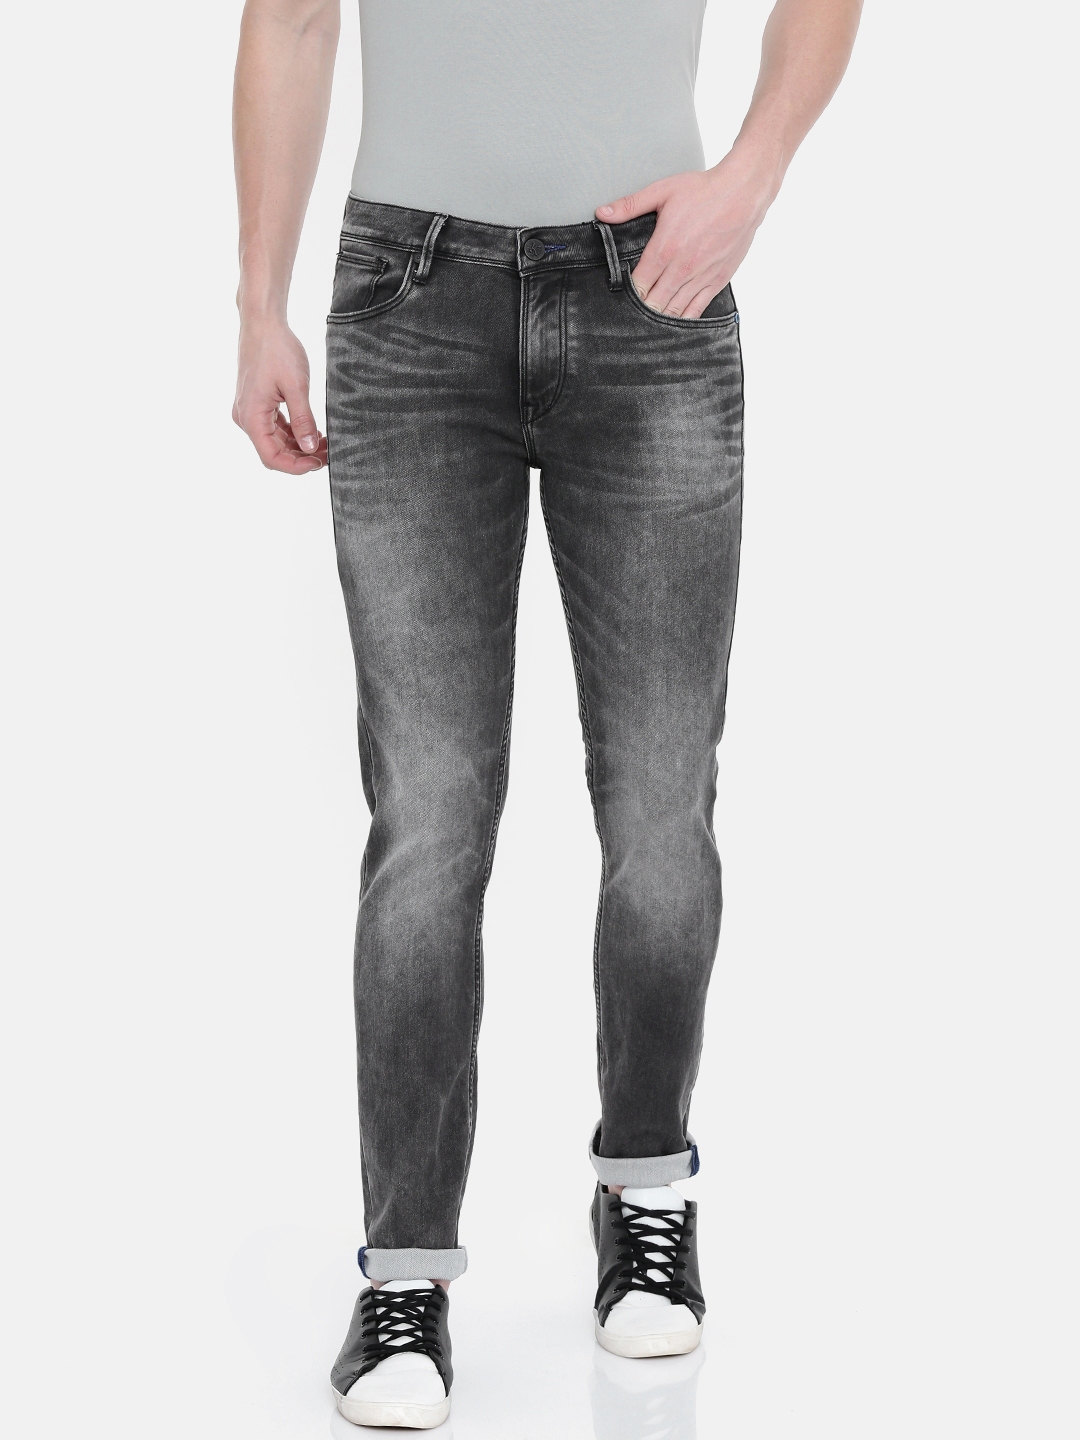 pacsun cropped jeans